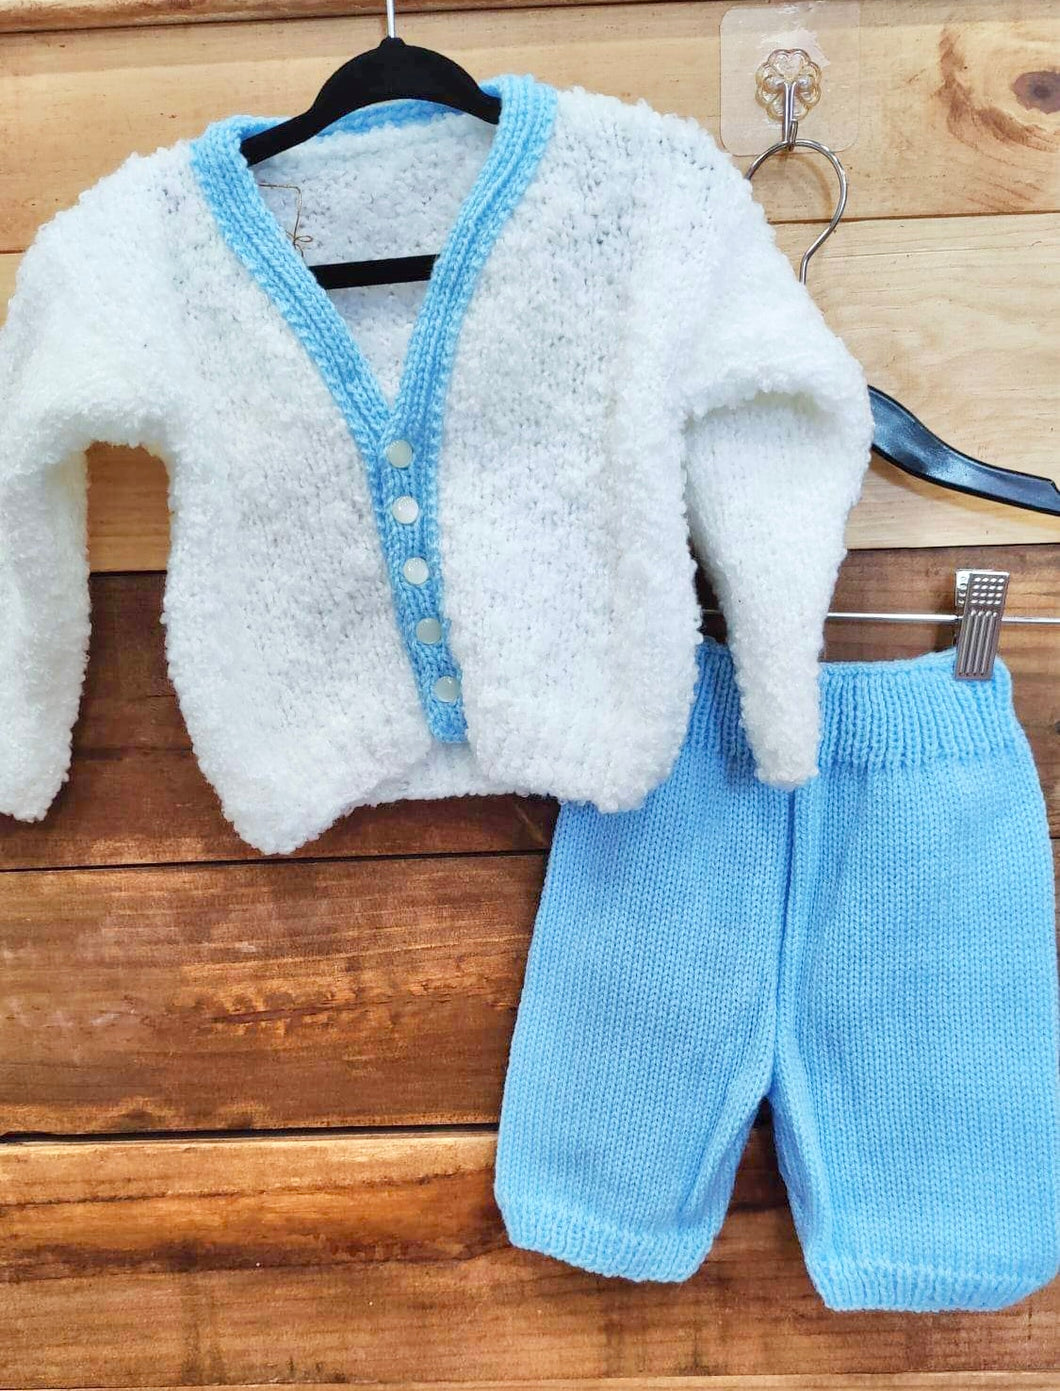 White & Blue Knit 2pc Outfit Size 12m